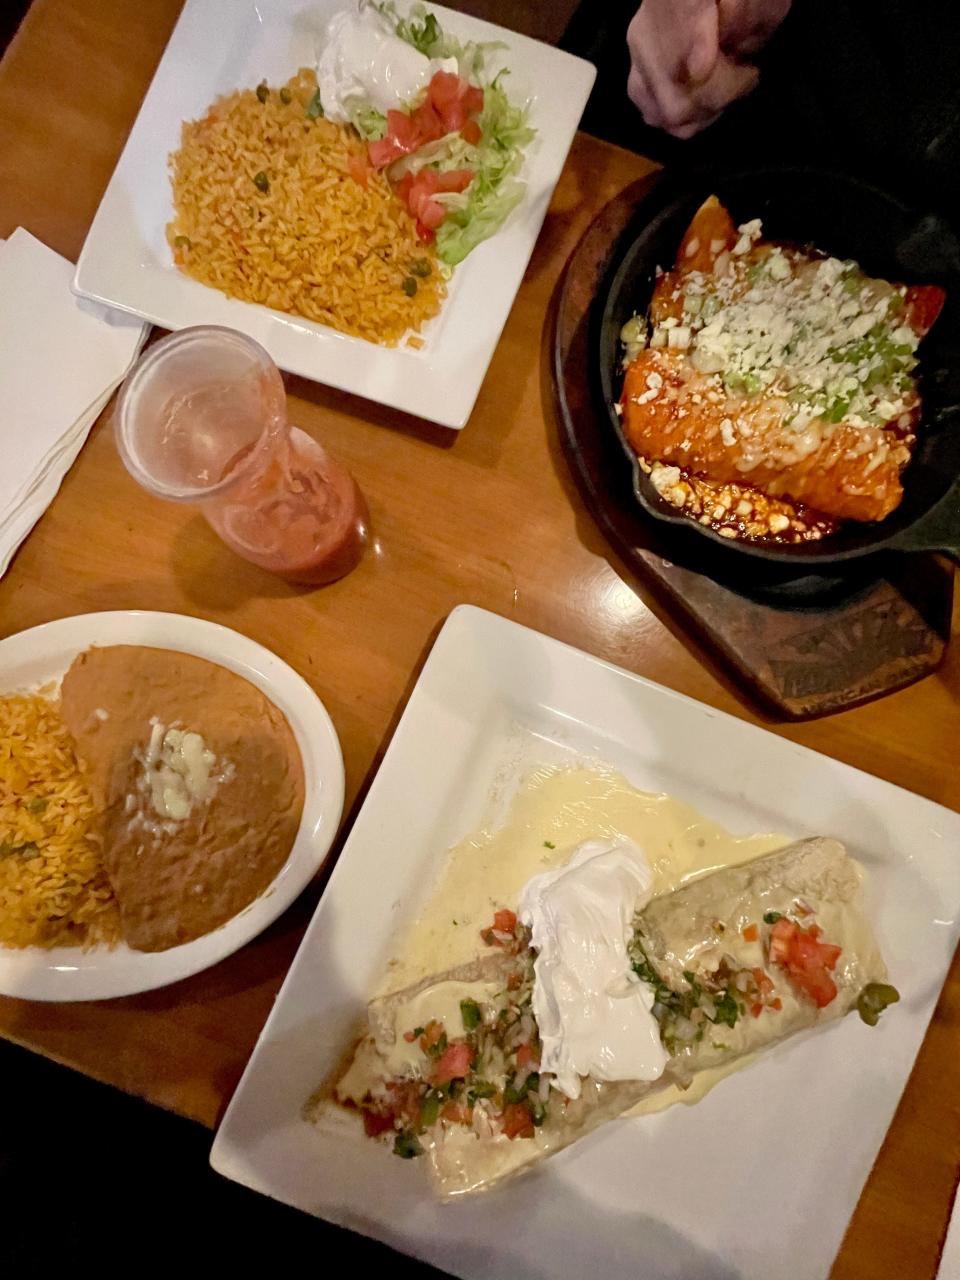 The portion sizes are generous at Don Tequila Bar & Grill in Canton.